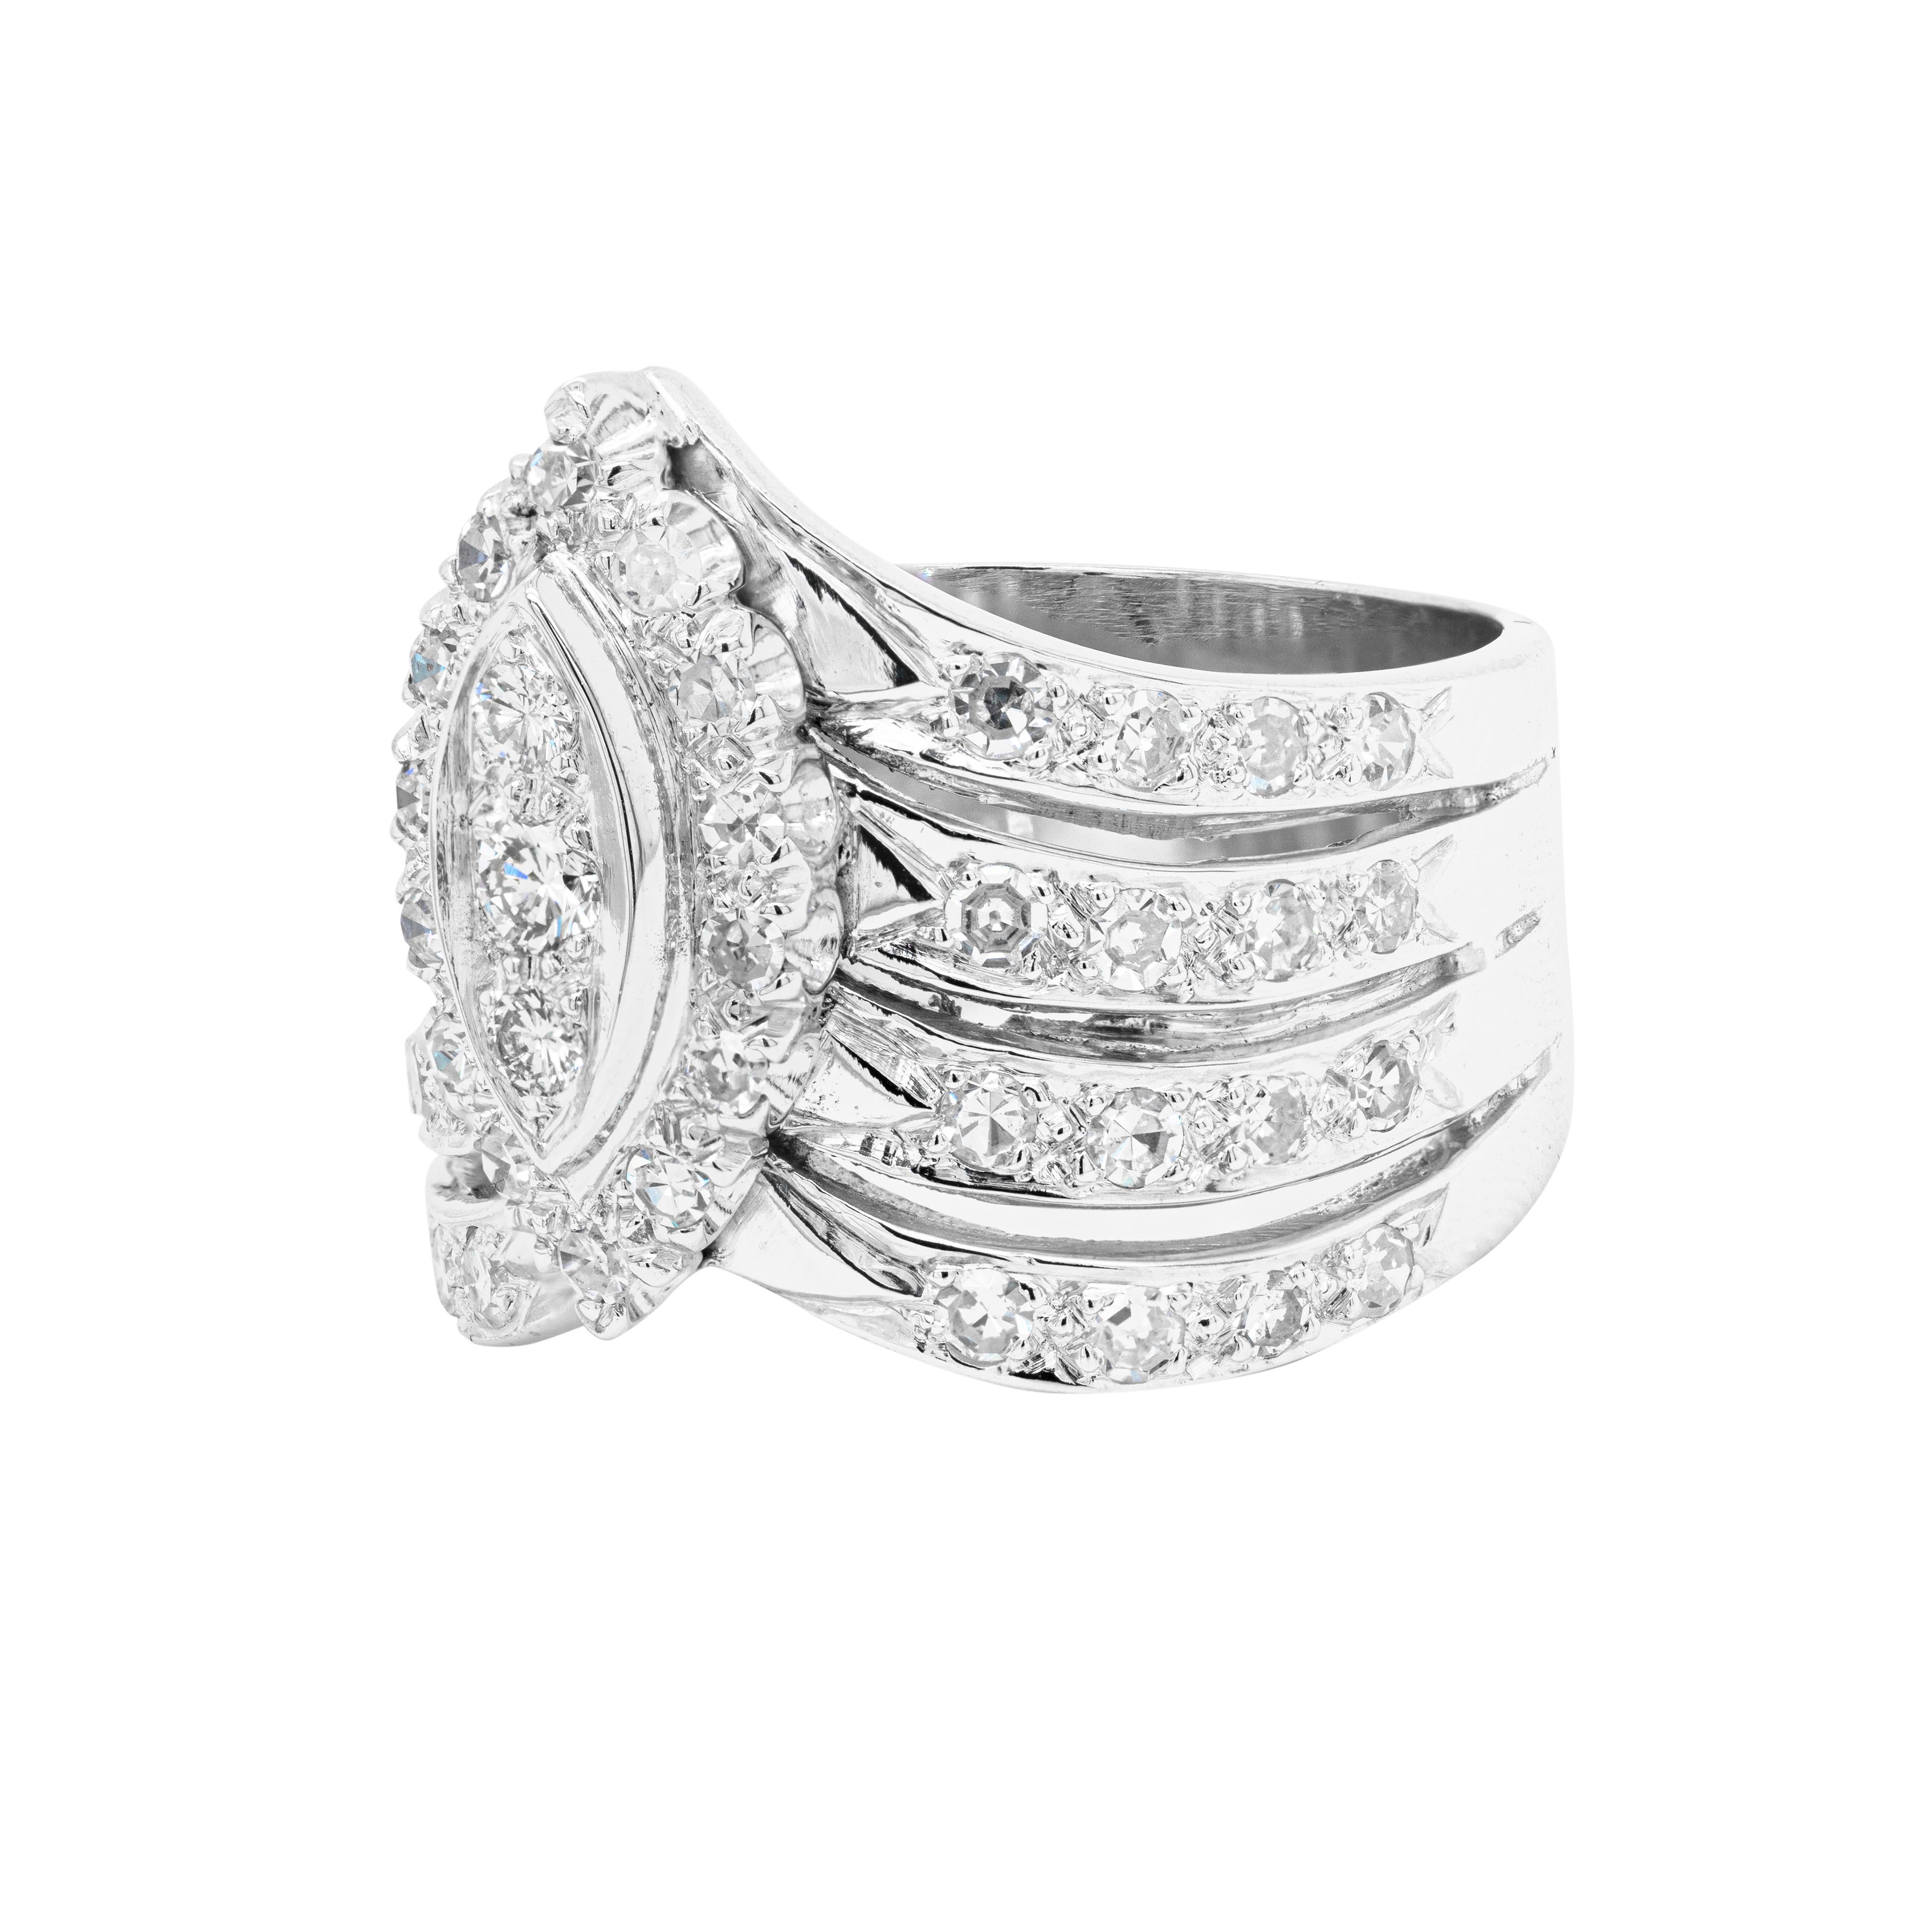 Gorgeous and bold, this 'V' chevron style 18 carat white gold cocktail ring is centred with 3 round brilliant cut diamonds vertically set within a marquise shaped bezel. Highlighting the centre stones there is a beautiful halo of 14 eight cut